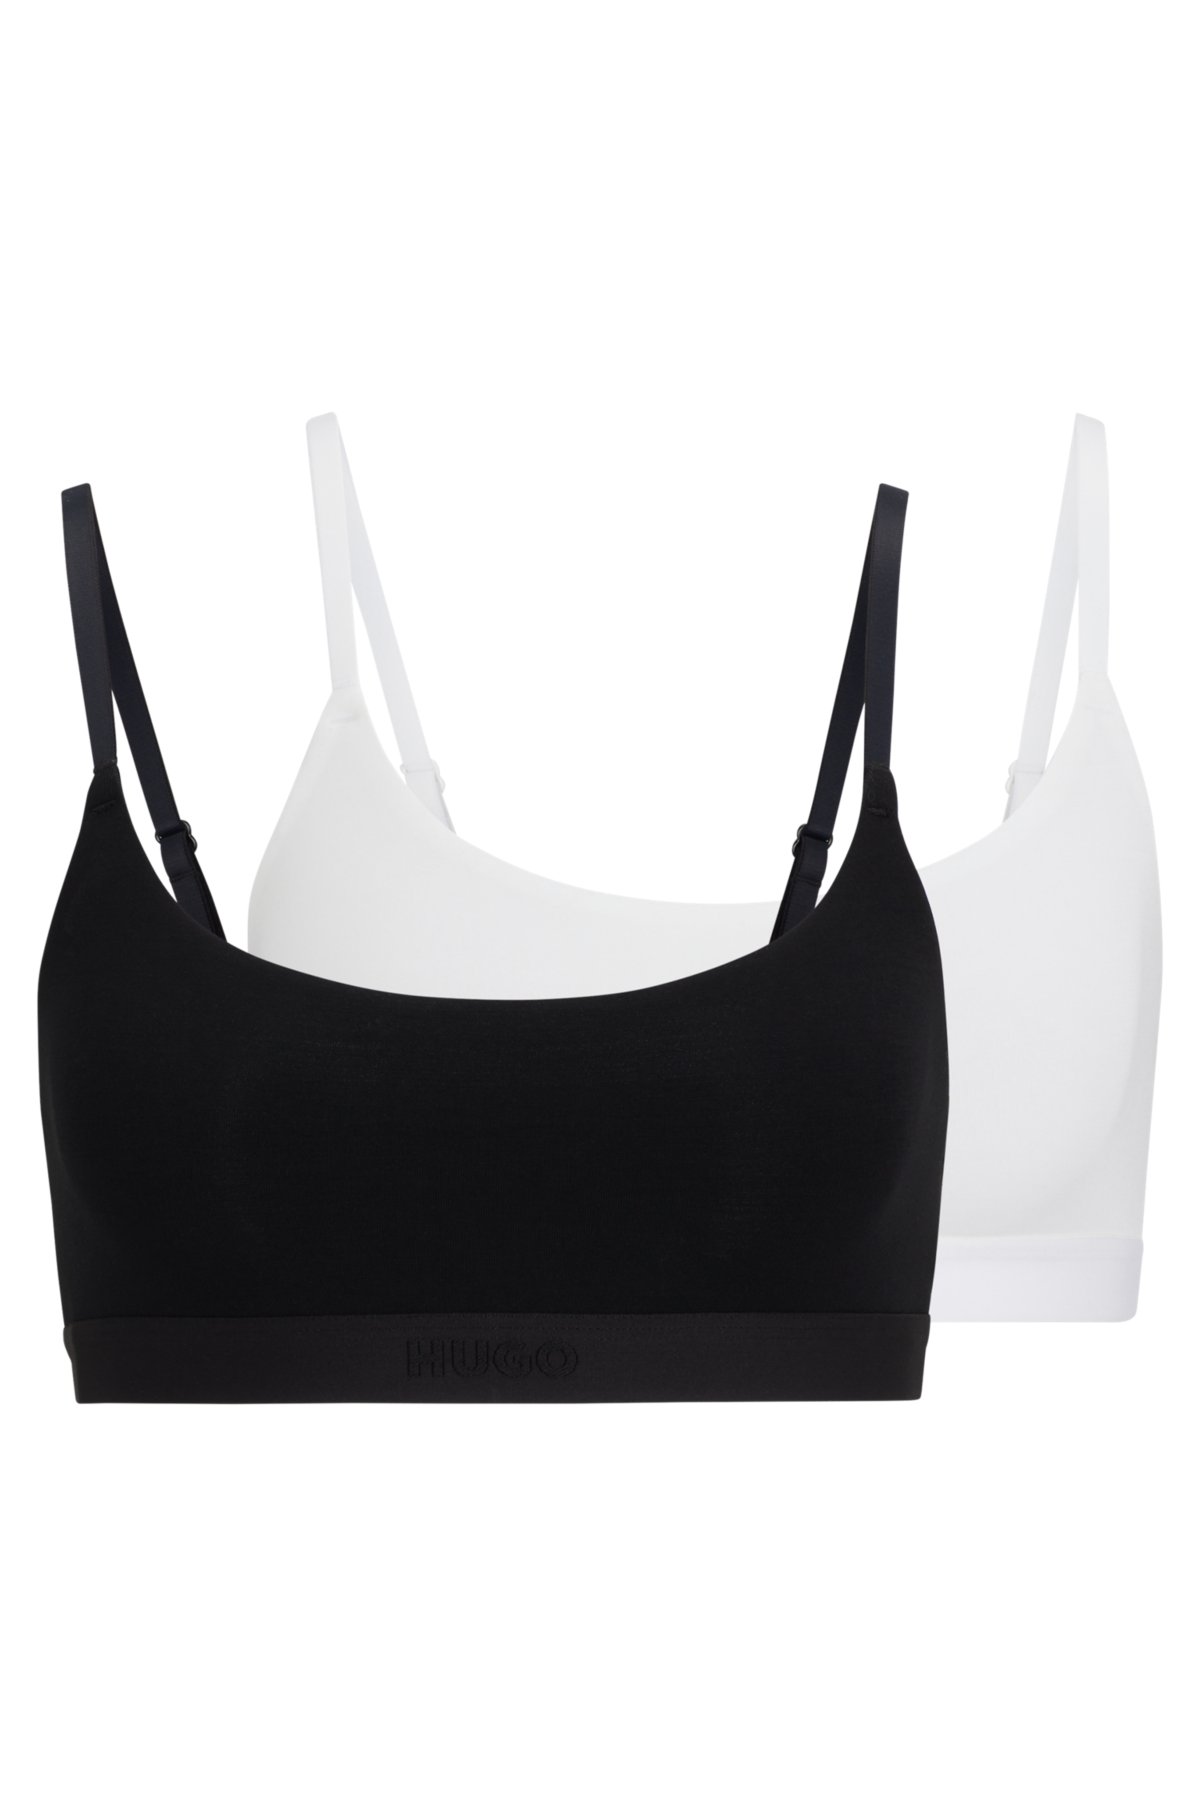 modal Two-pack in bralettes stretch HUGO of -